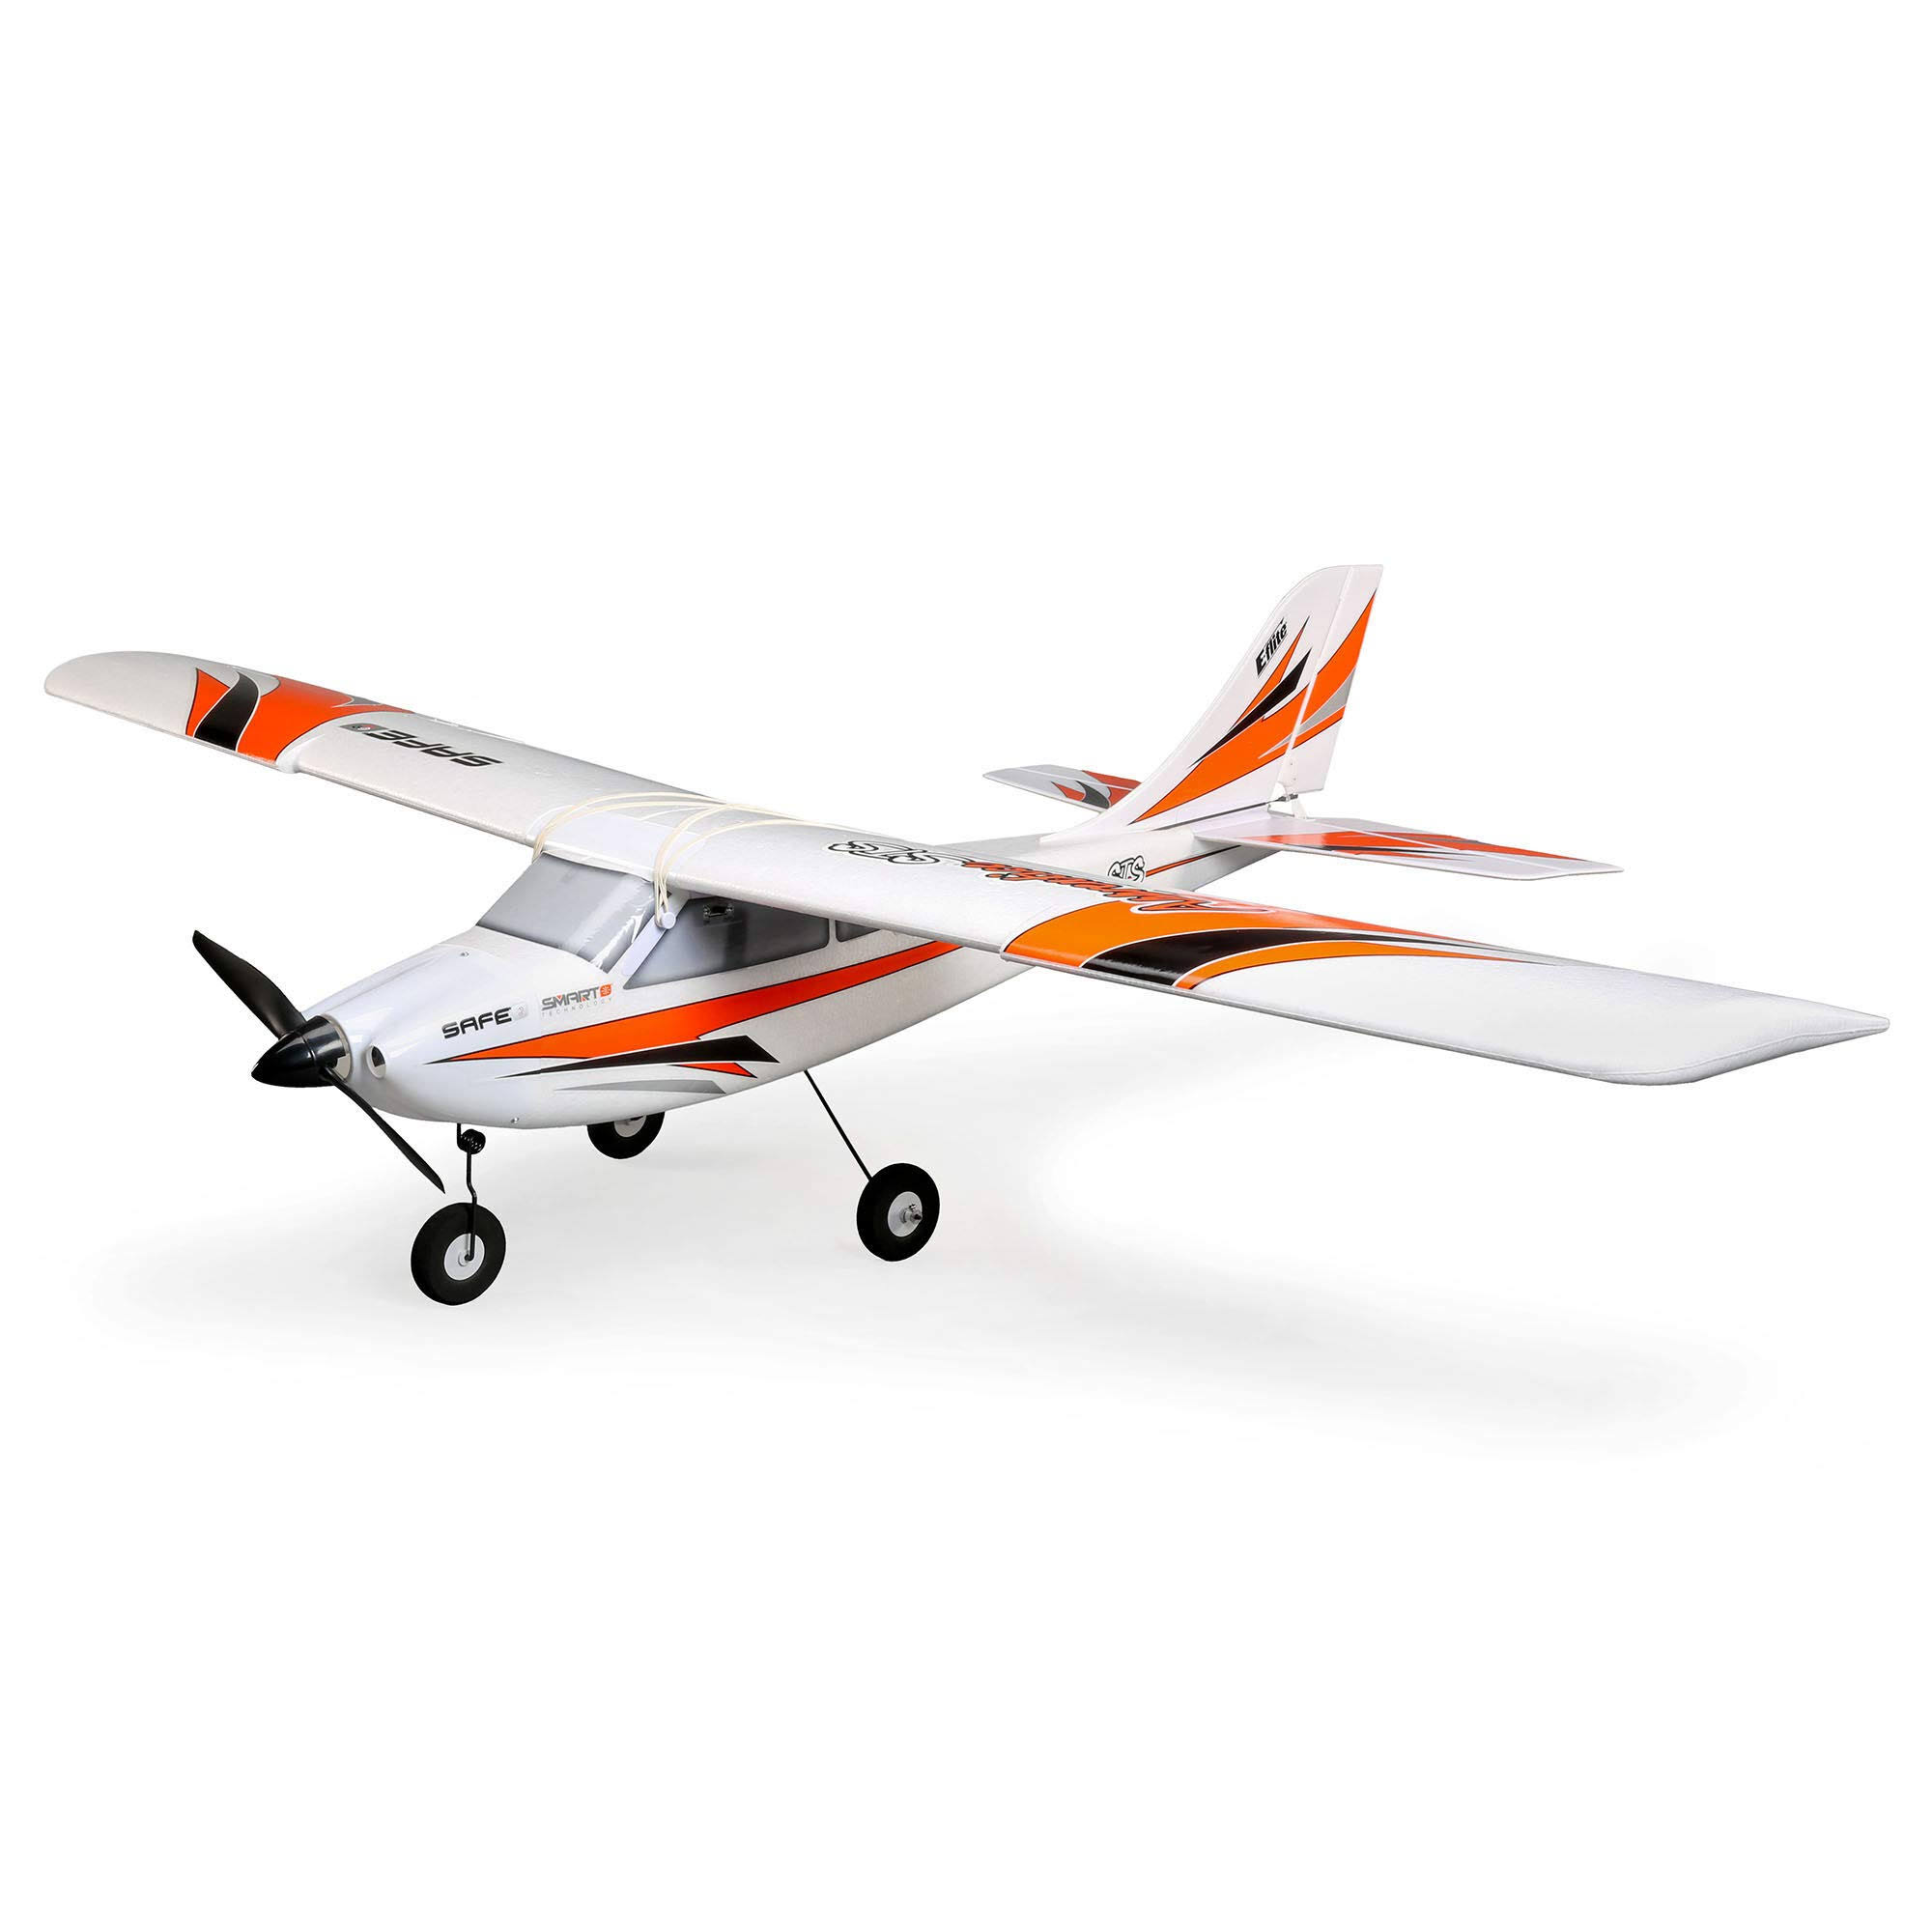 E-flite RC Airplane Apprentice STS 1.5m RTF (Transmitter, Receiver, Battery and Charger Included) with DXS, EFL37000